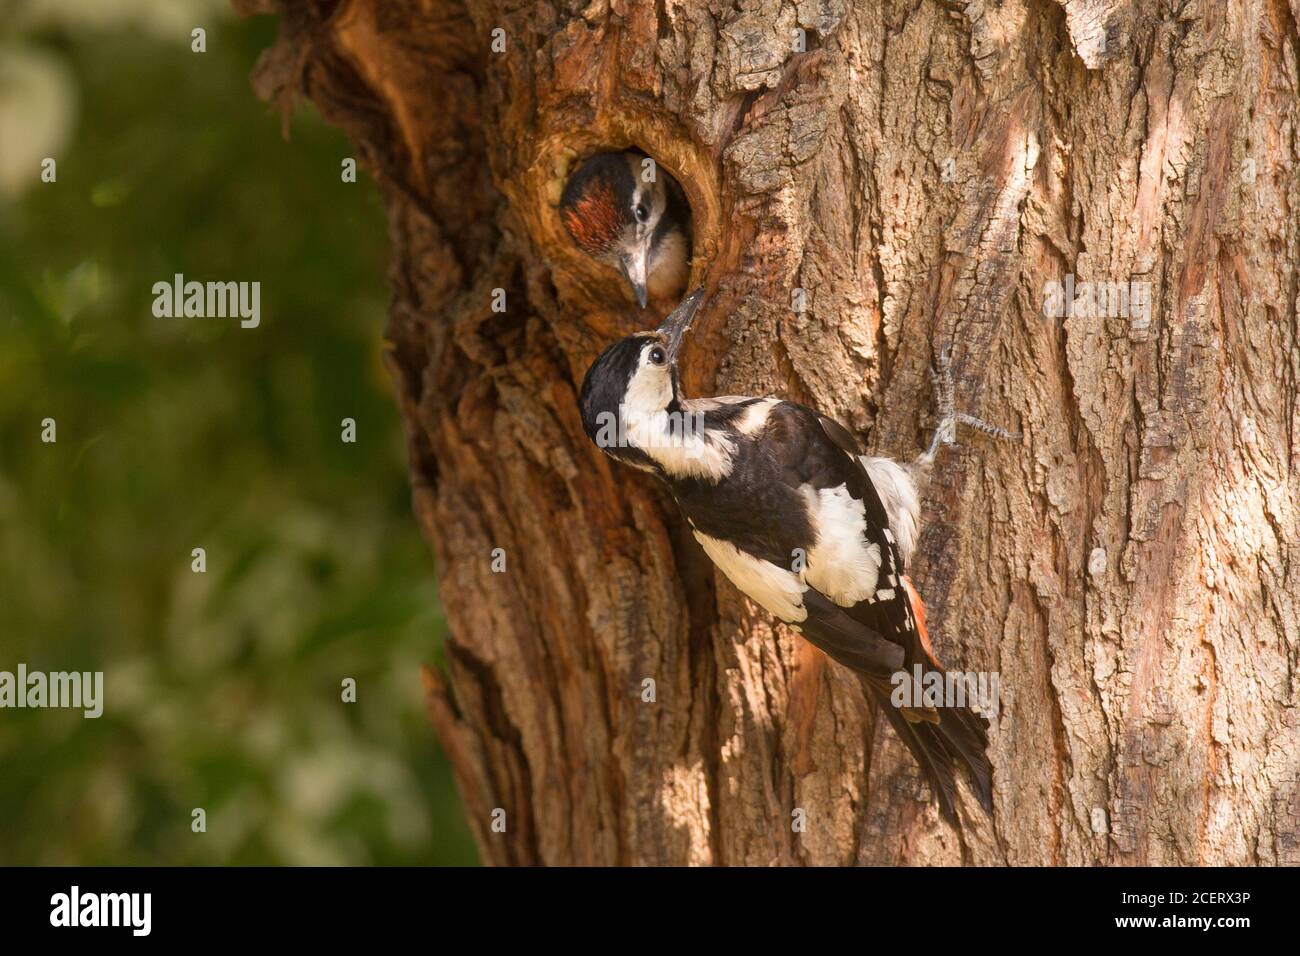 Syrian Woodpecker (Dendrocopos syriacus) At its nest feeding a young hatchling bird, The Syrian Woodpecker is a resident breeding bird from southeaste Stock Photo